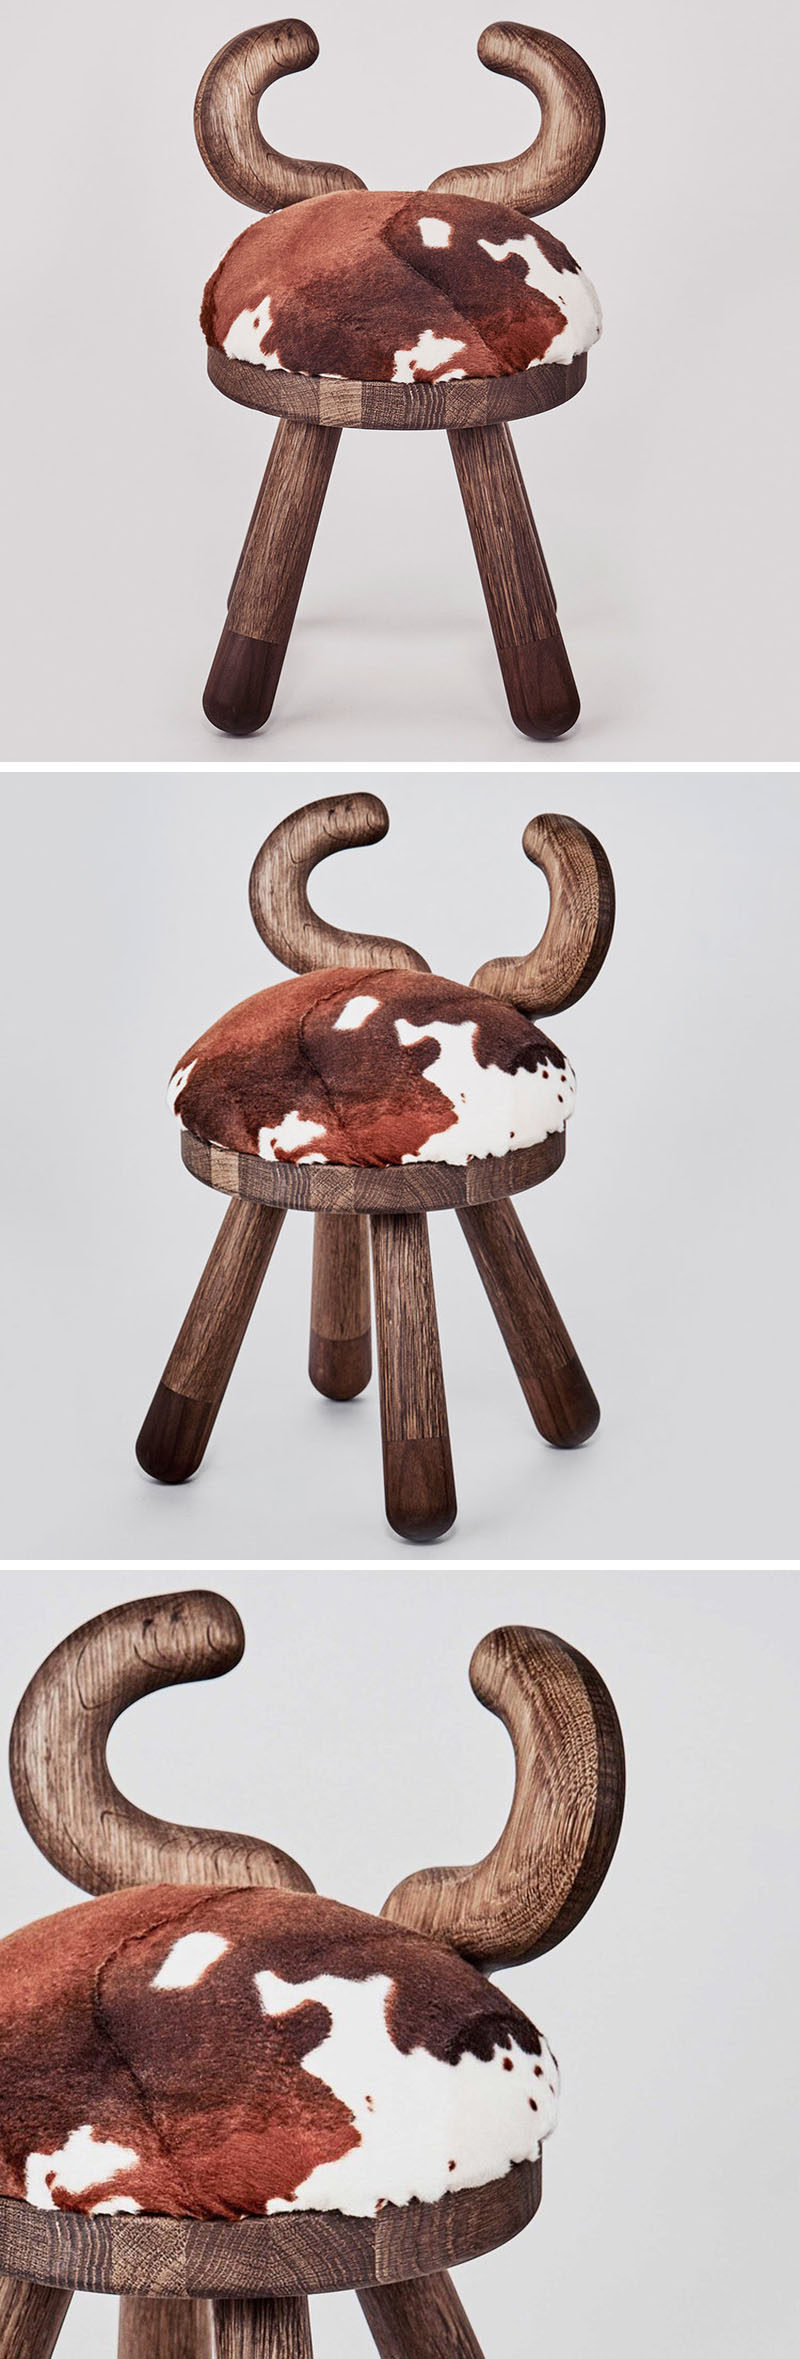 Japanese designer Takeshi Sawada, has designed this cow stool as part of a collection of quirky farm animal inspired stools for EO - Elements Optimal.